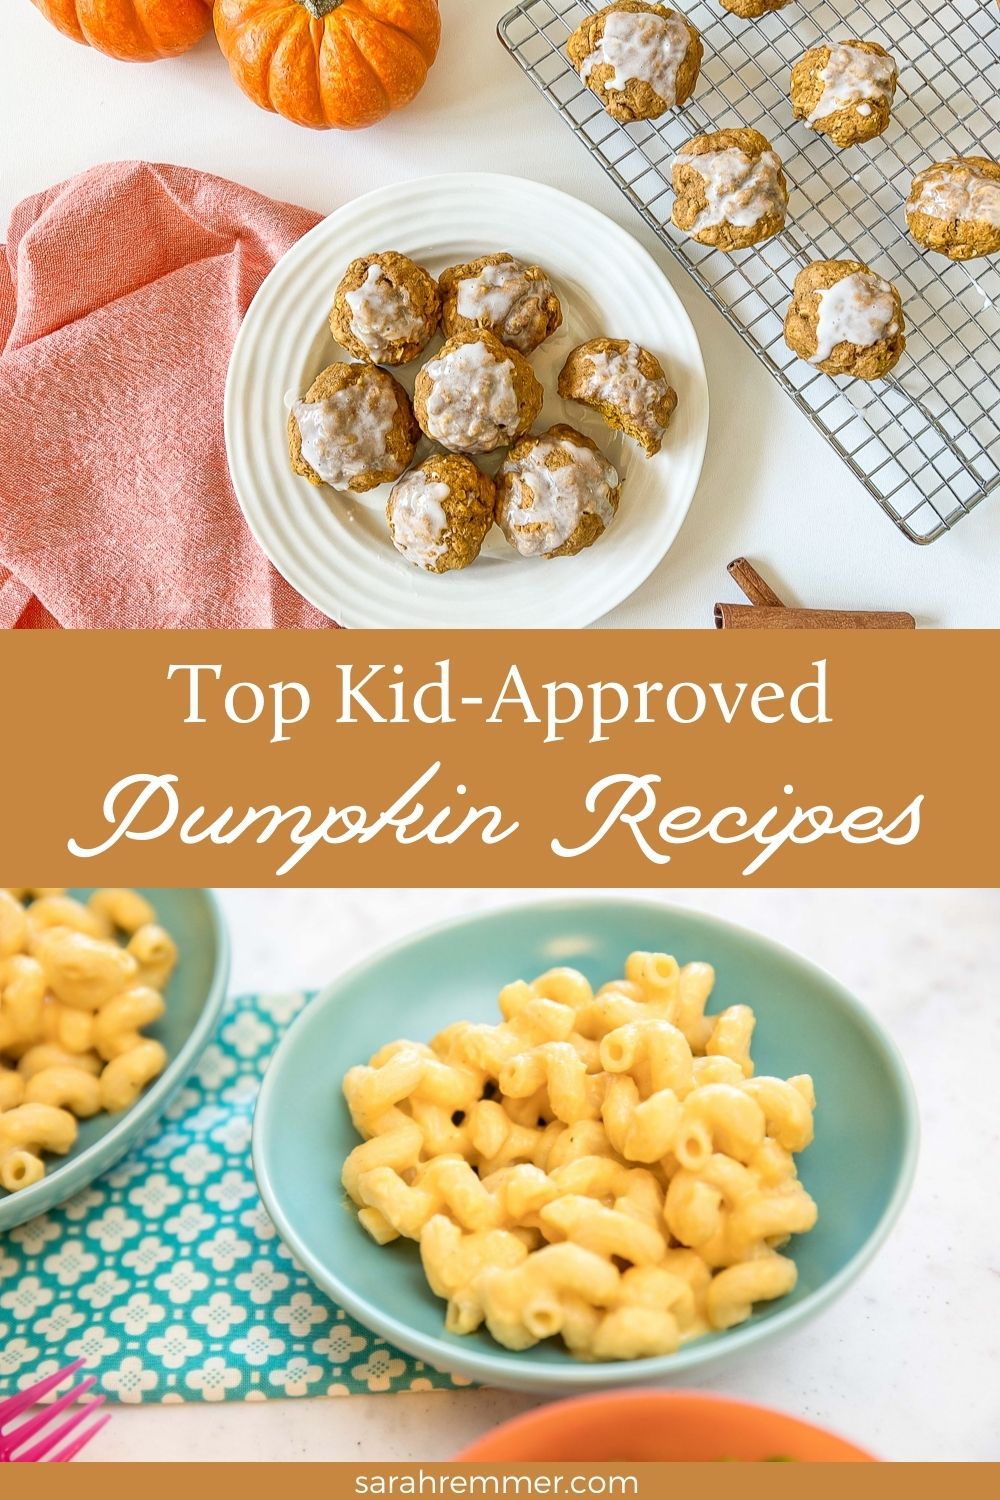 When it comes to pumpkin season, I’m ALL IN. As in, my top culinary priority during Autumn months is all things pumpkin recipes. Pumpkin muffins, pumpkin energy bites, pumpkin cookies, pumpkin oatmeal…you name it, it likely has pumpkin in it!